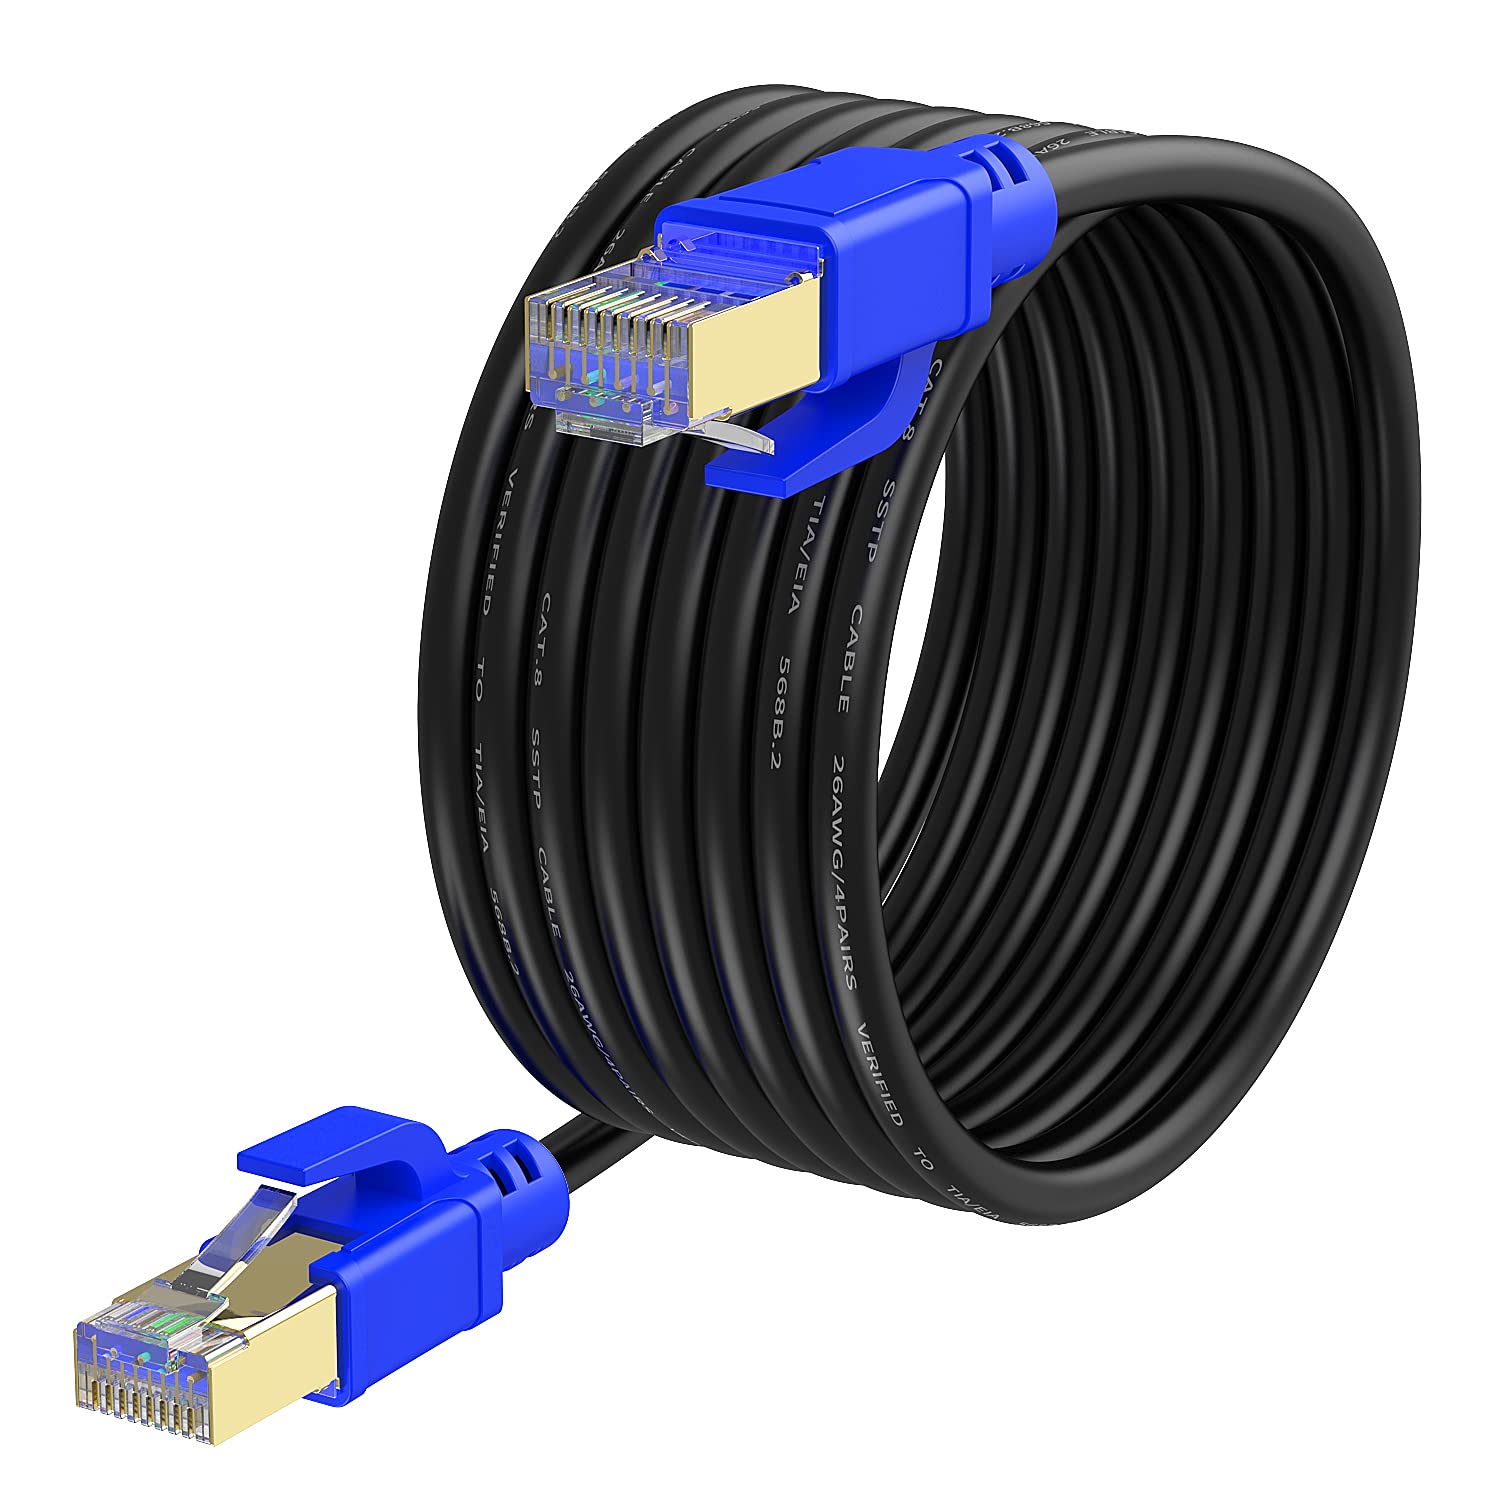 Consider using shielded networking cables to minimize external interference.
Keep networking cables away from sources of electromagnetic interference.